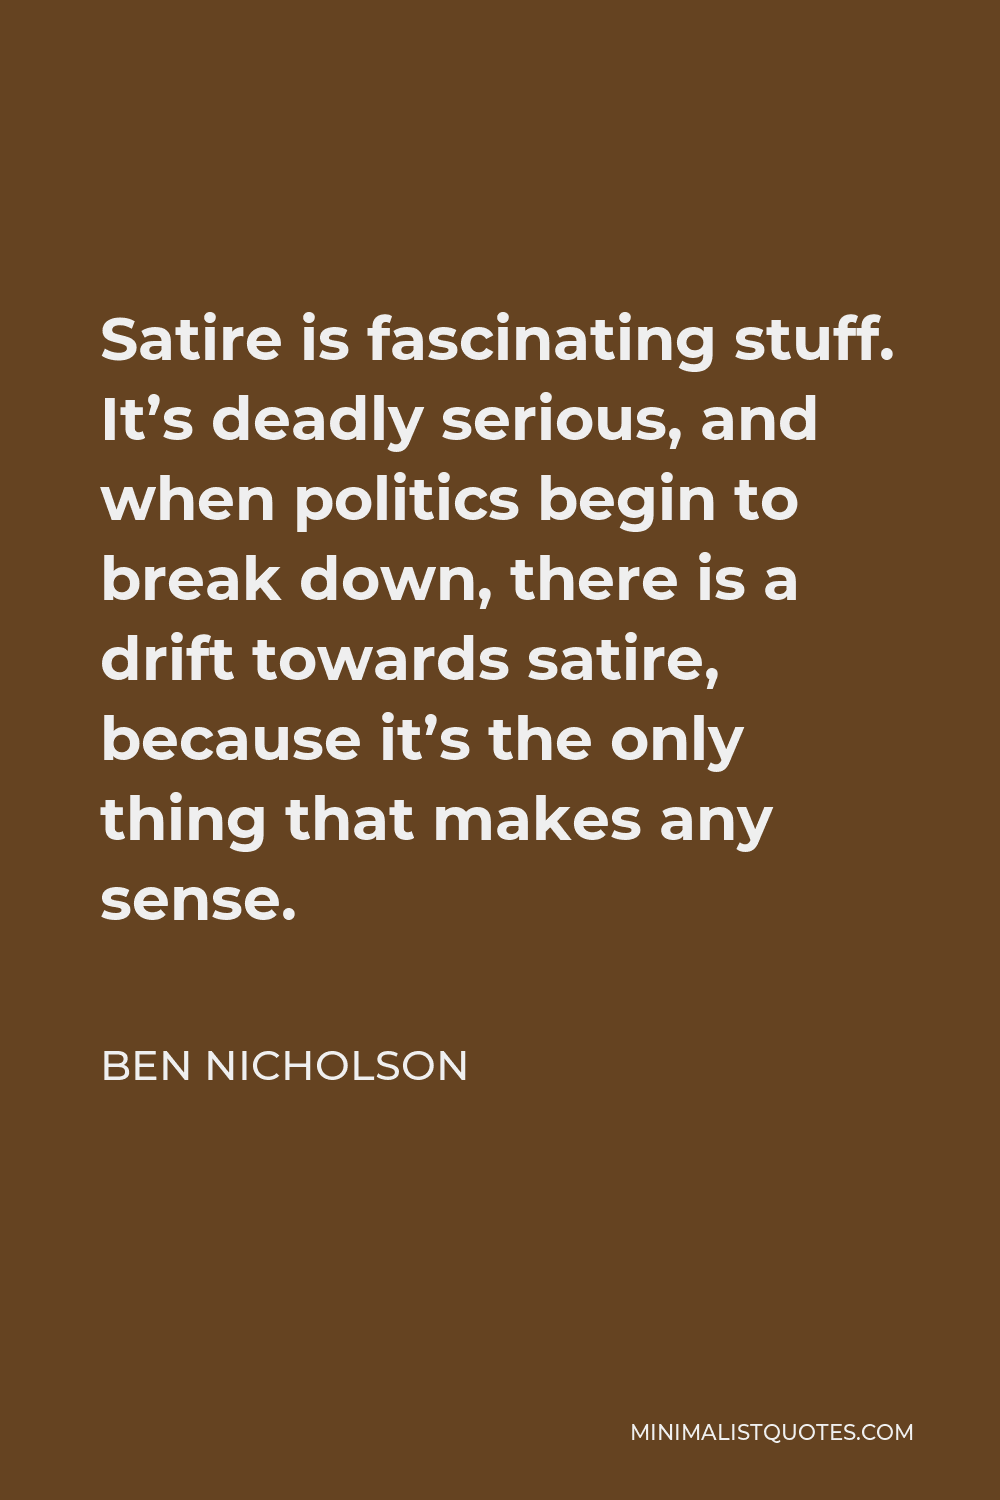 Ben Nicholson Quote - Satire is fascinating stuff. It’s deadly serious, and when politics begin to break down, there is a drift towards satire, because it’s the only thing that makes any sense.